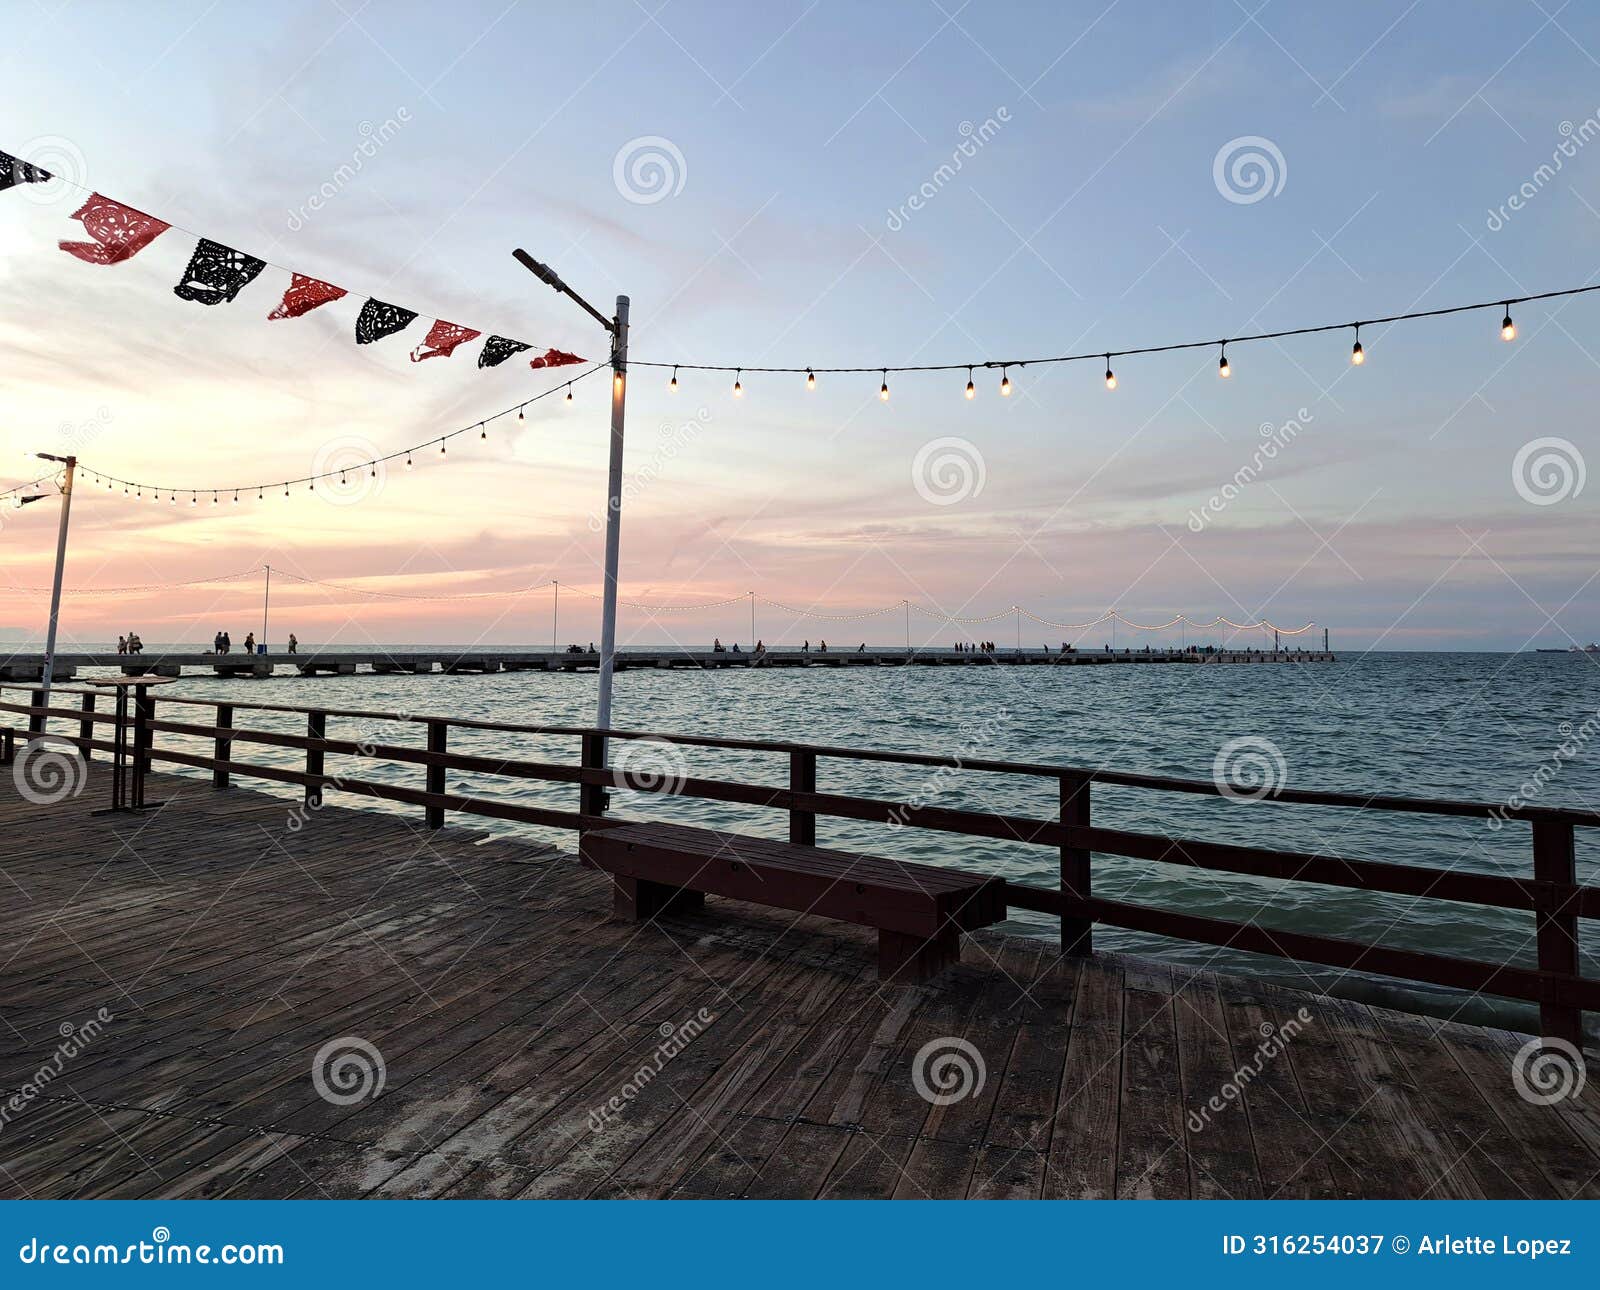 progreso is a mexican port city on the yucatan peninsula with its iconic arched pier and famous boardwalk